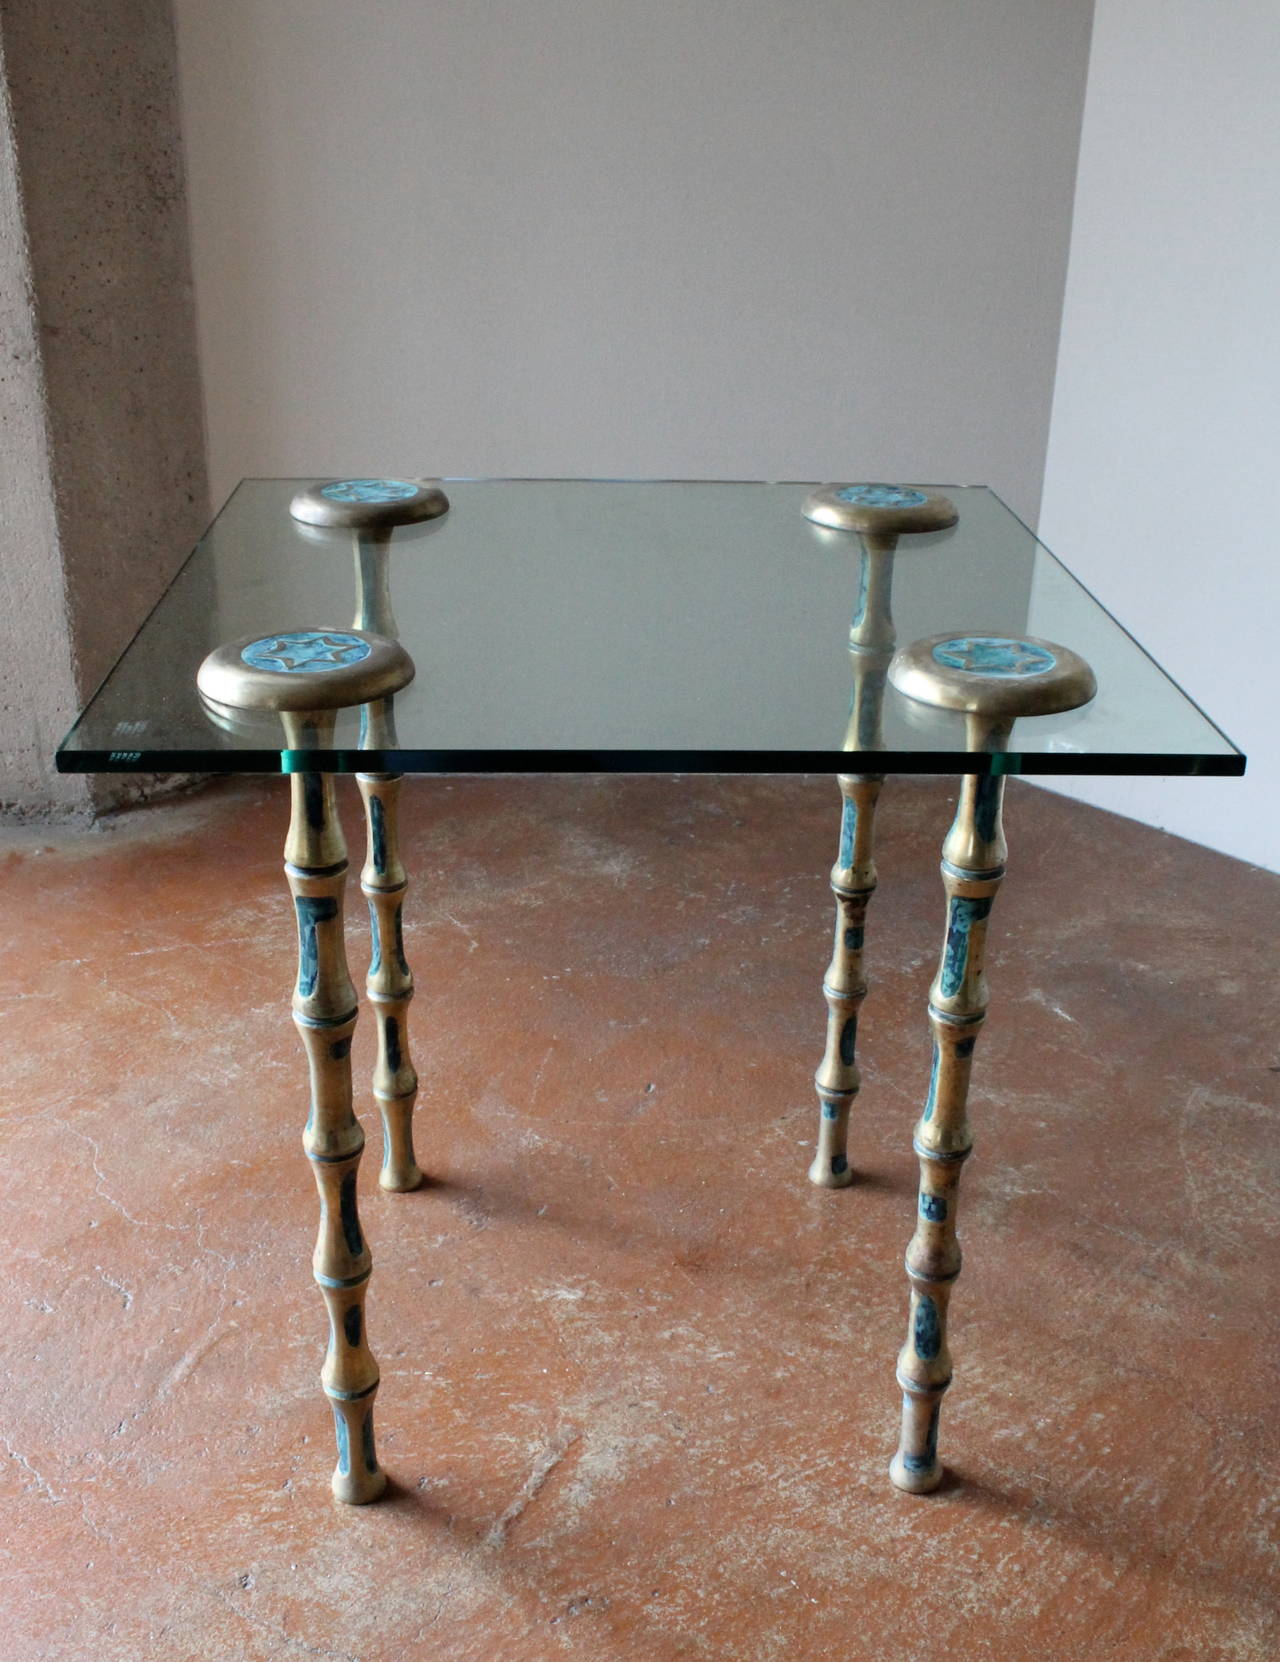 Rare Brass Bamboo Side Tables by Pepe Mendoza, Mexico City, 1958 For Sale 3